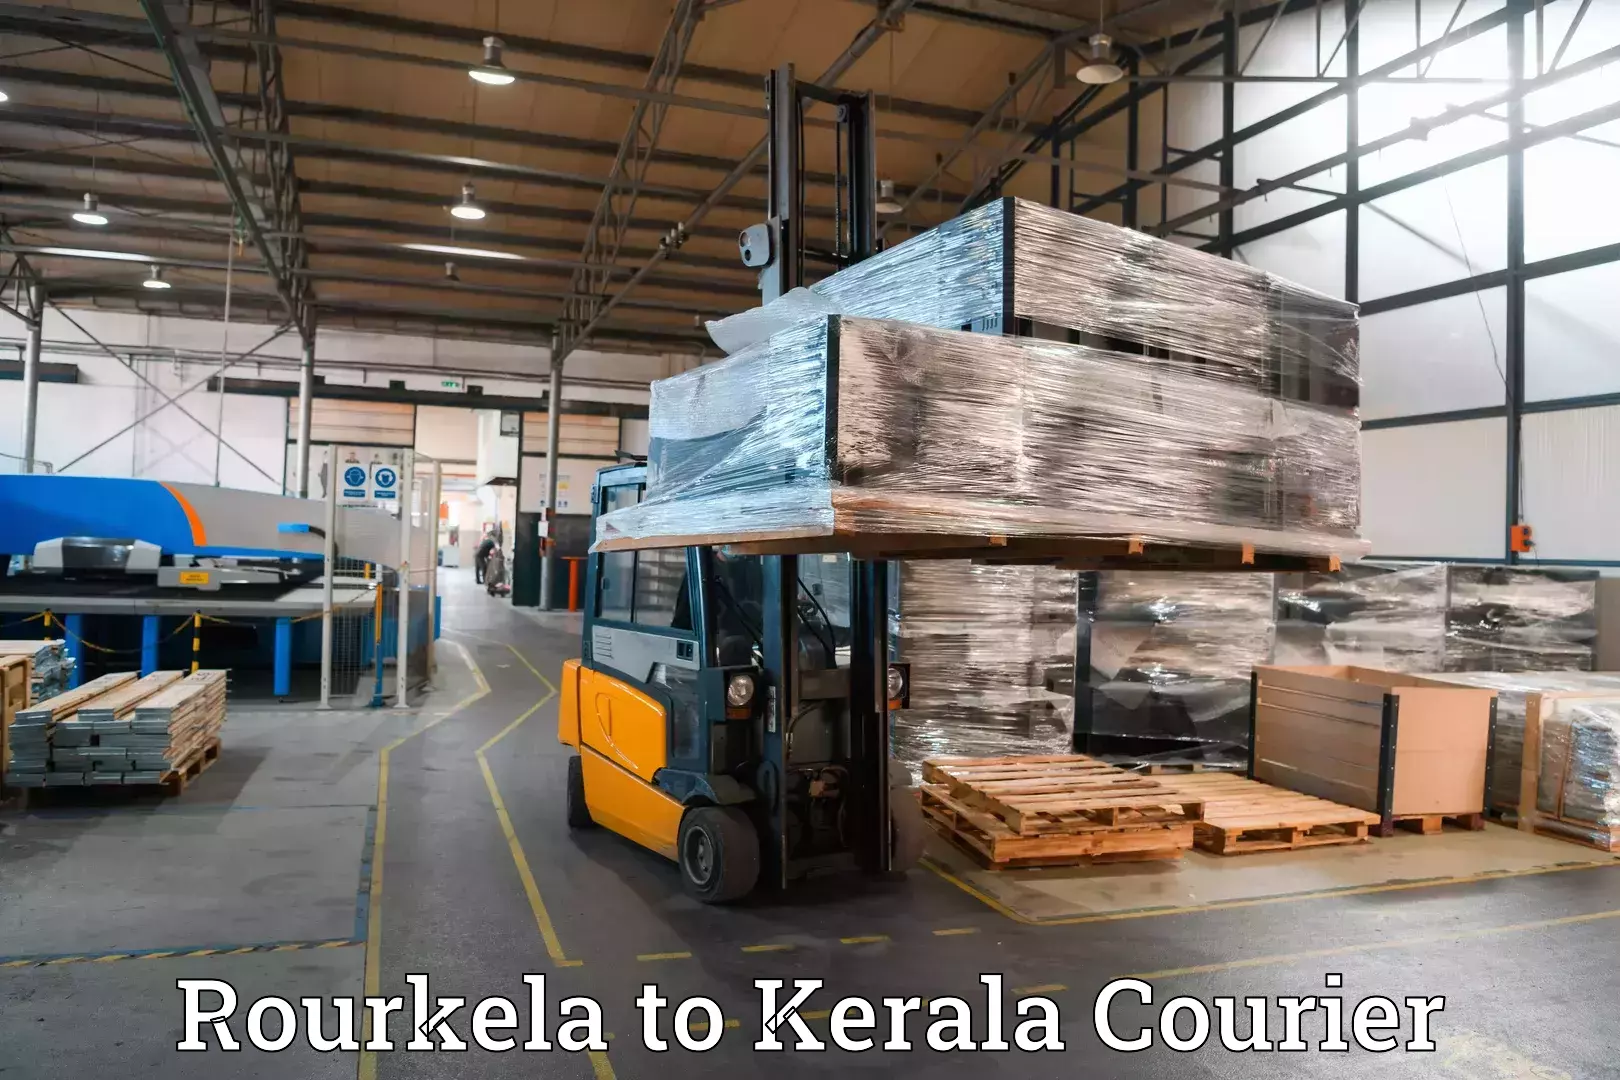 Luggage delivery network Rourkela to Kerala